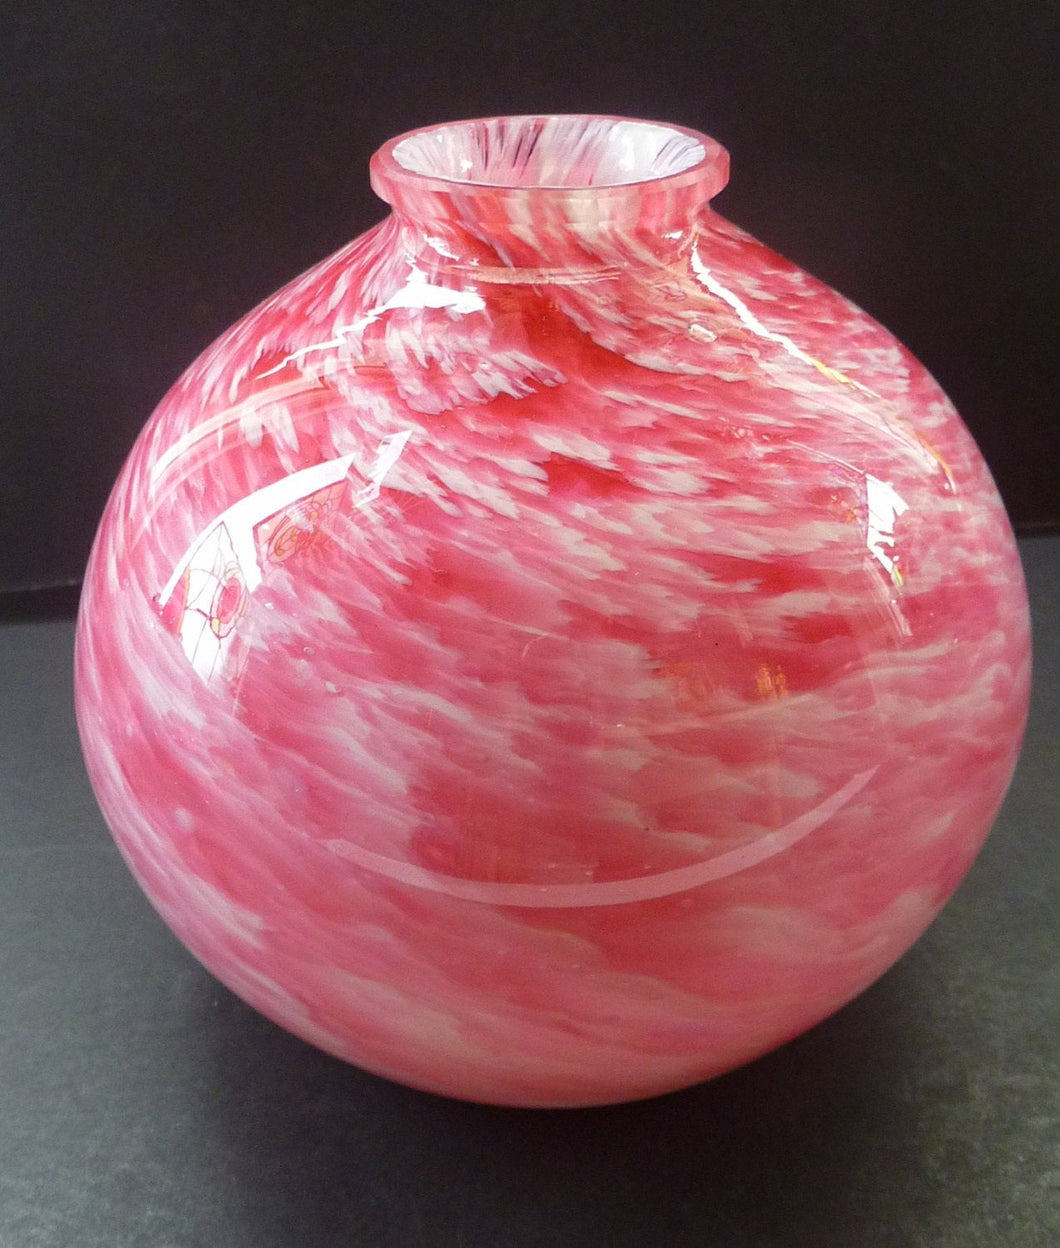 Lovely LARGE Chunky Vintage Globular Vase. With Pink and White Swirls; Cased in Clear Glass